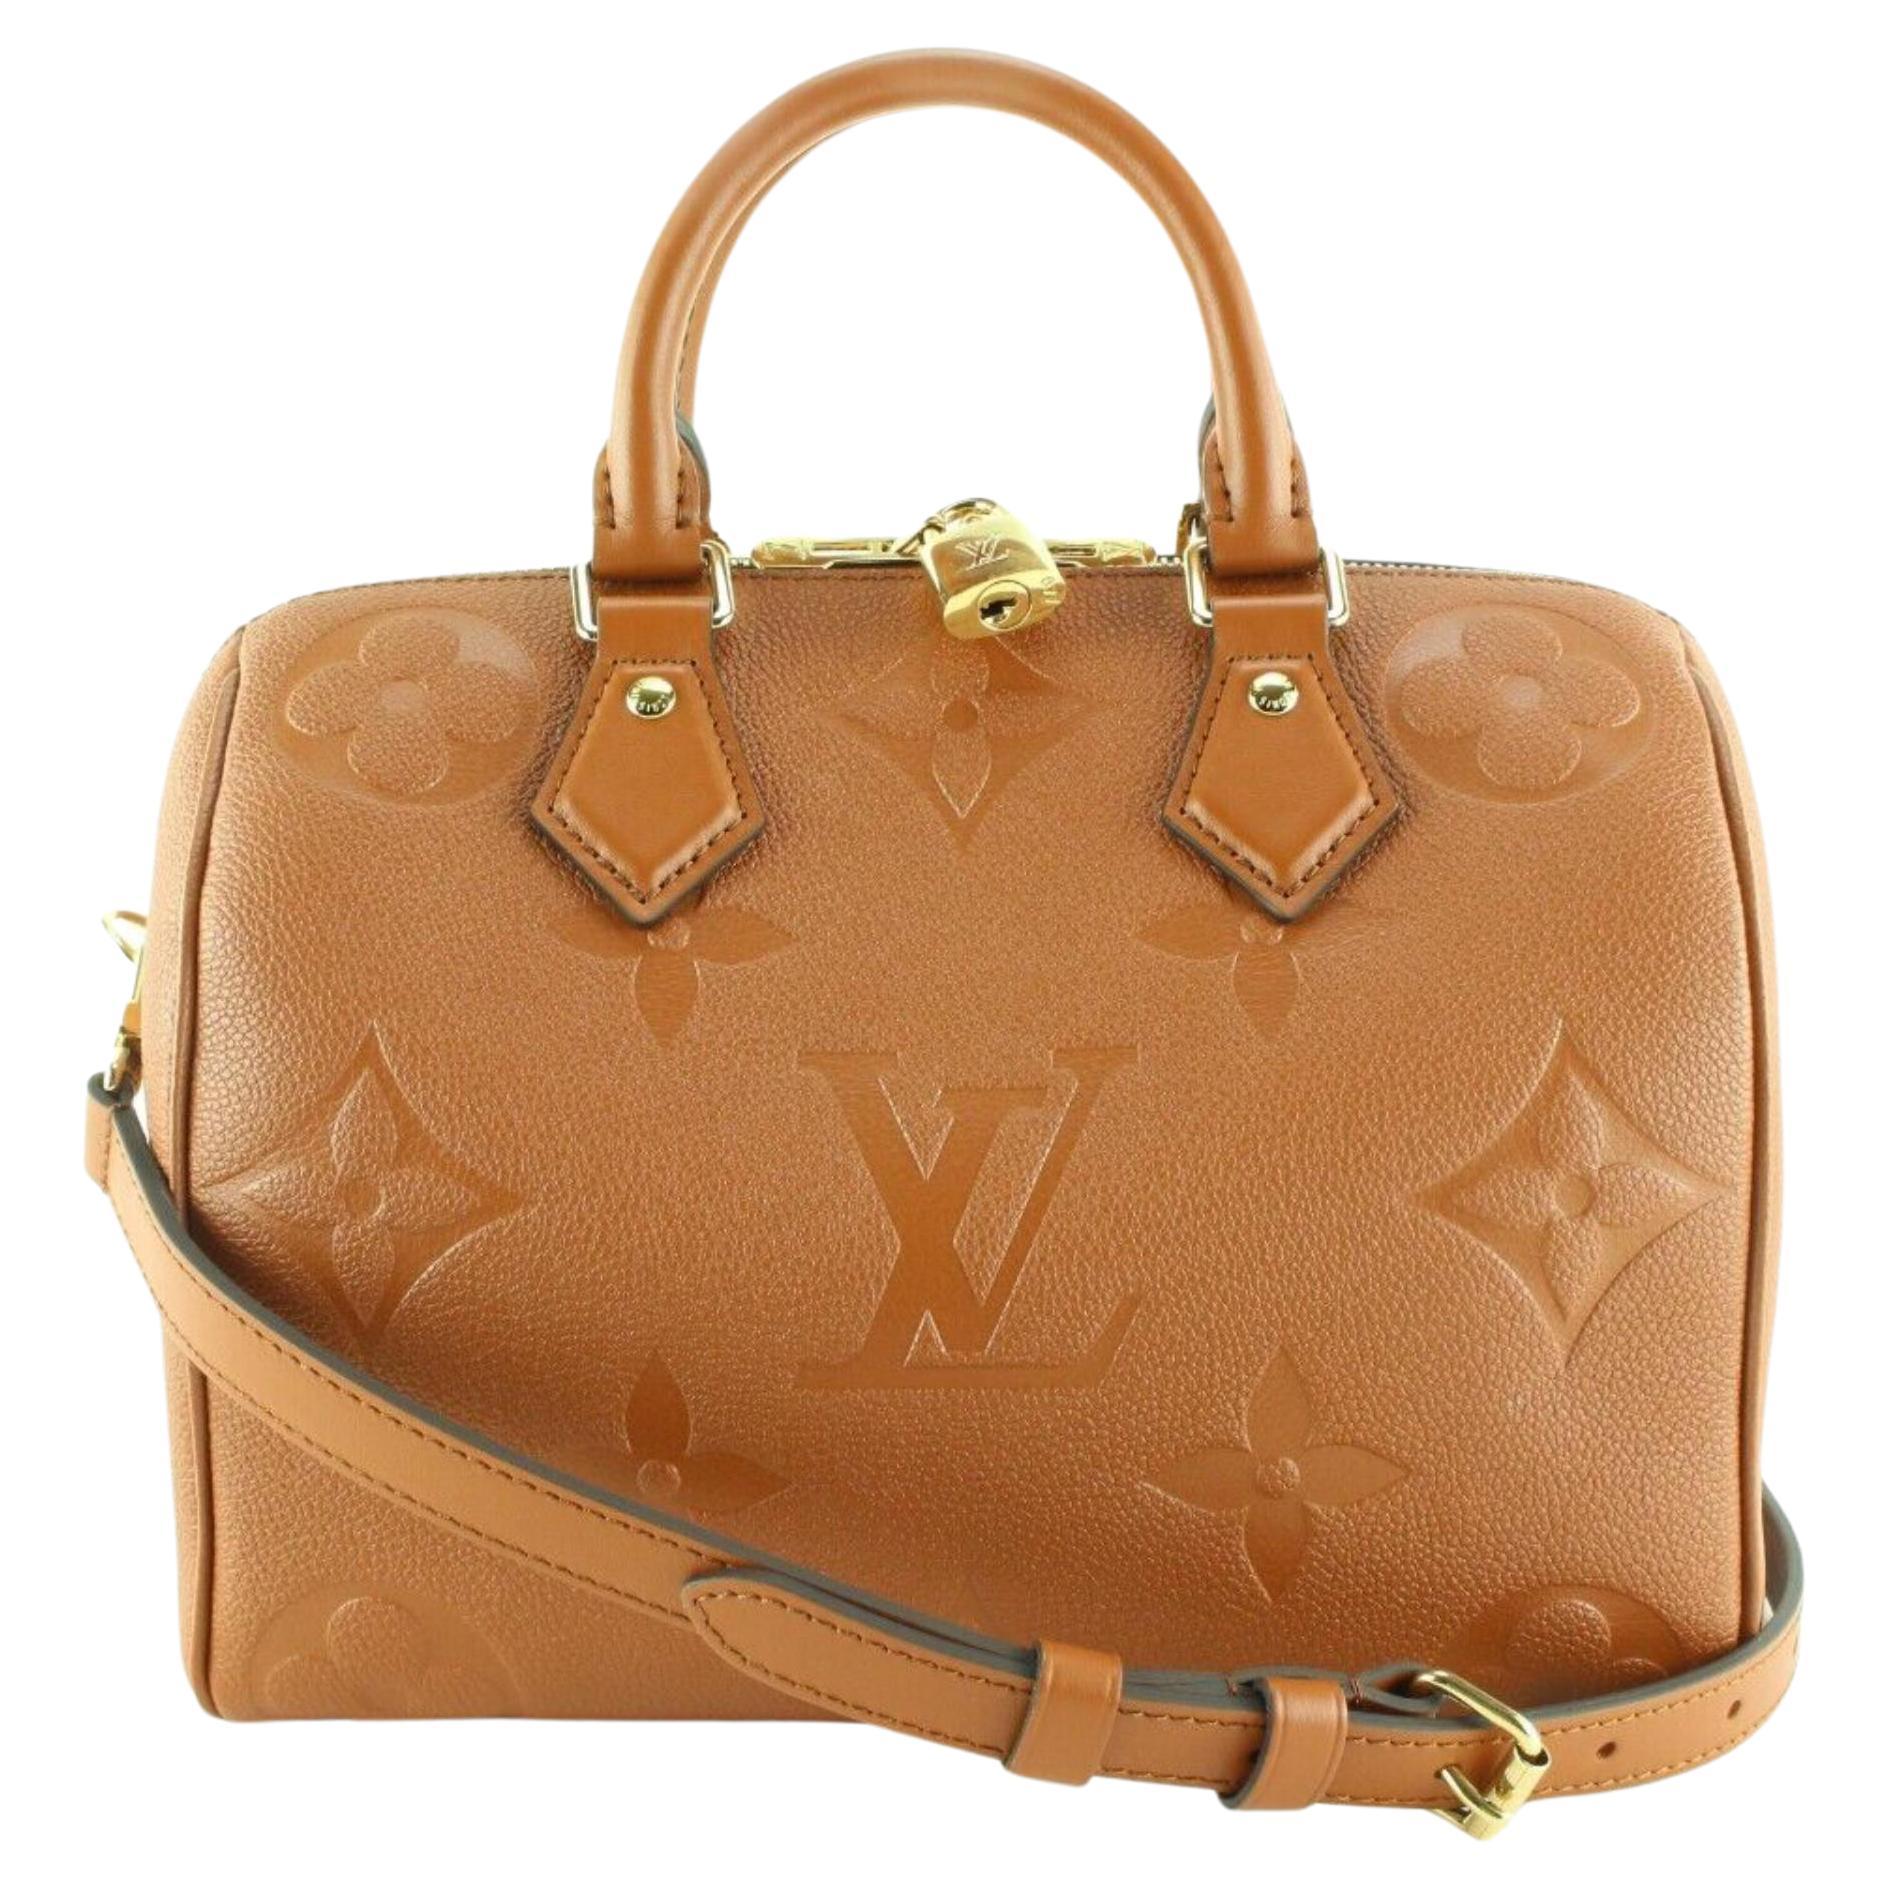 Louis Vuitton 2000 - 255 For Sale on 1stDibs